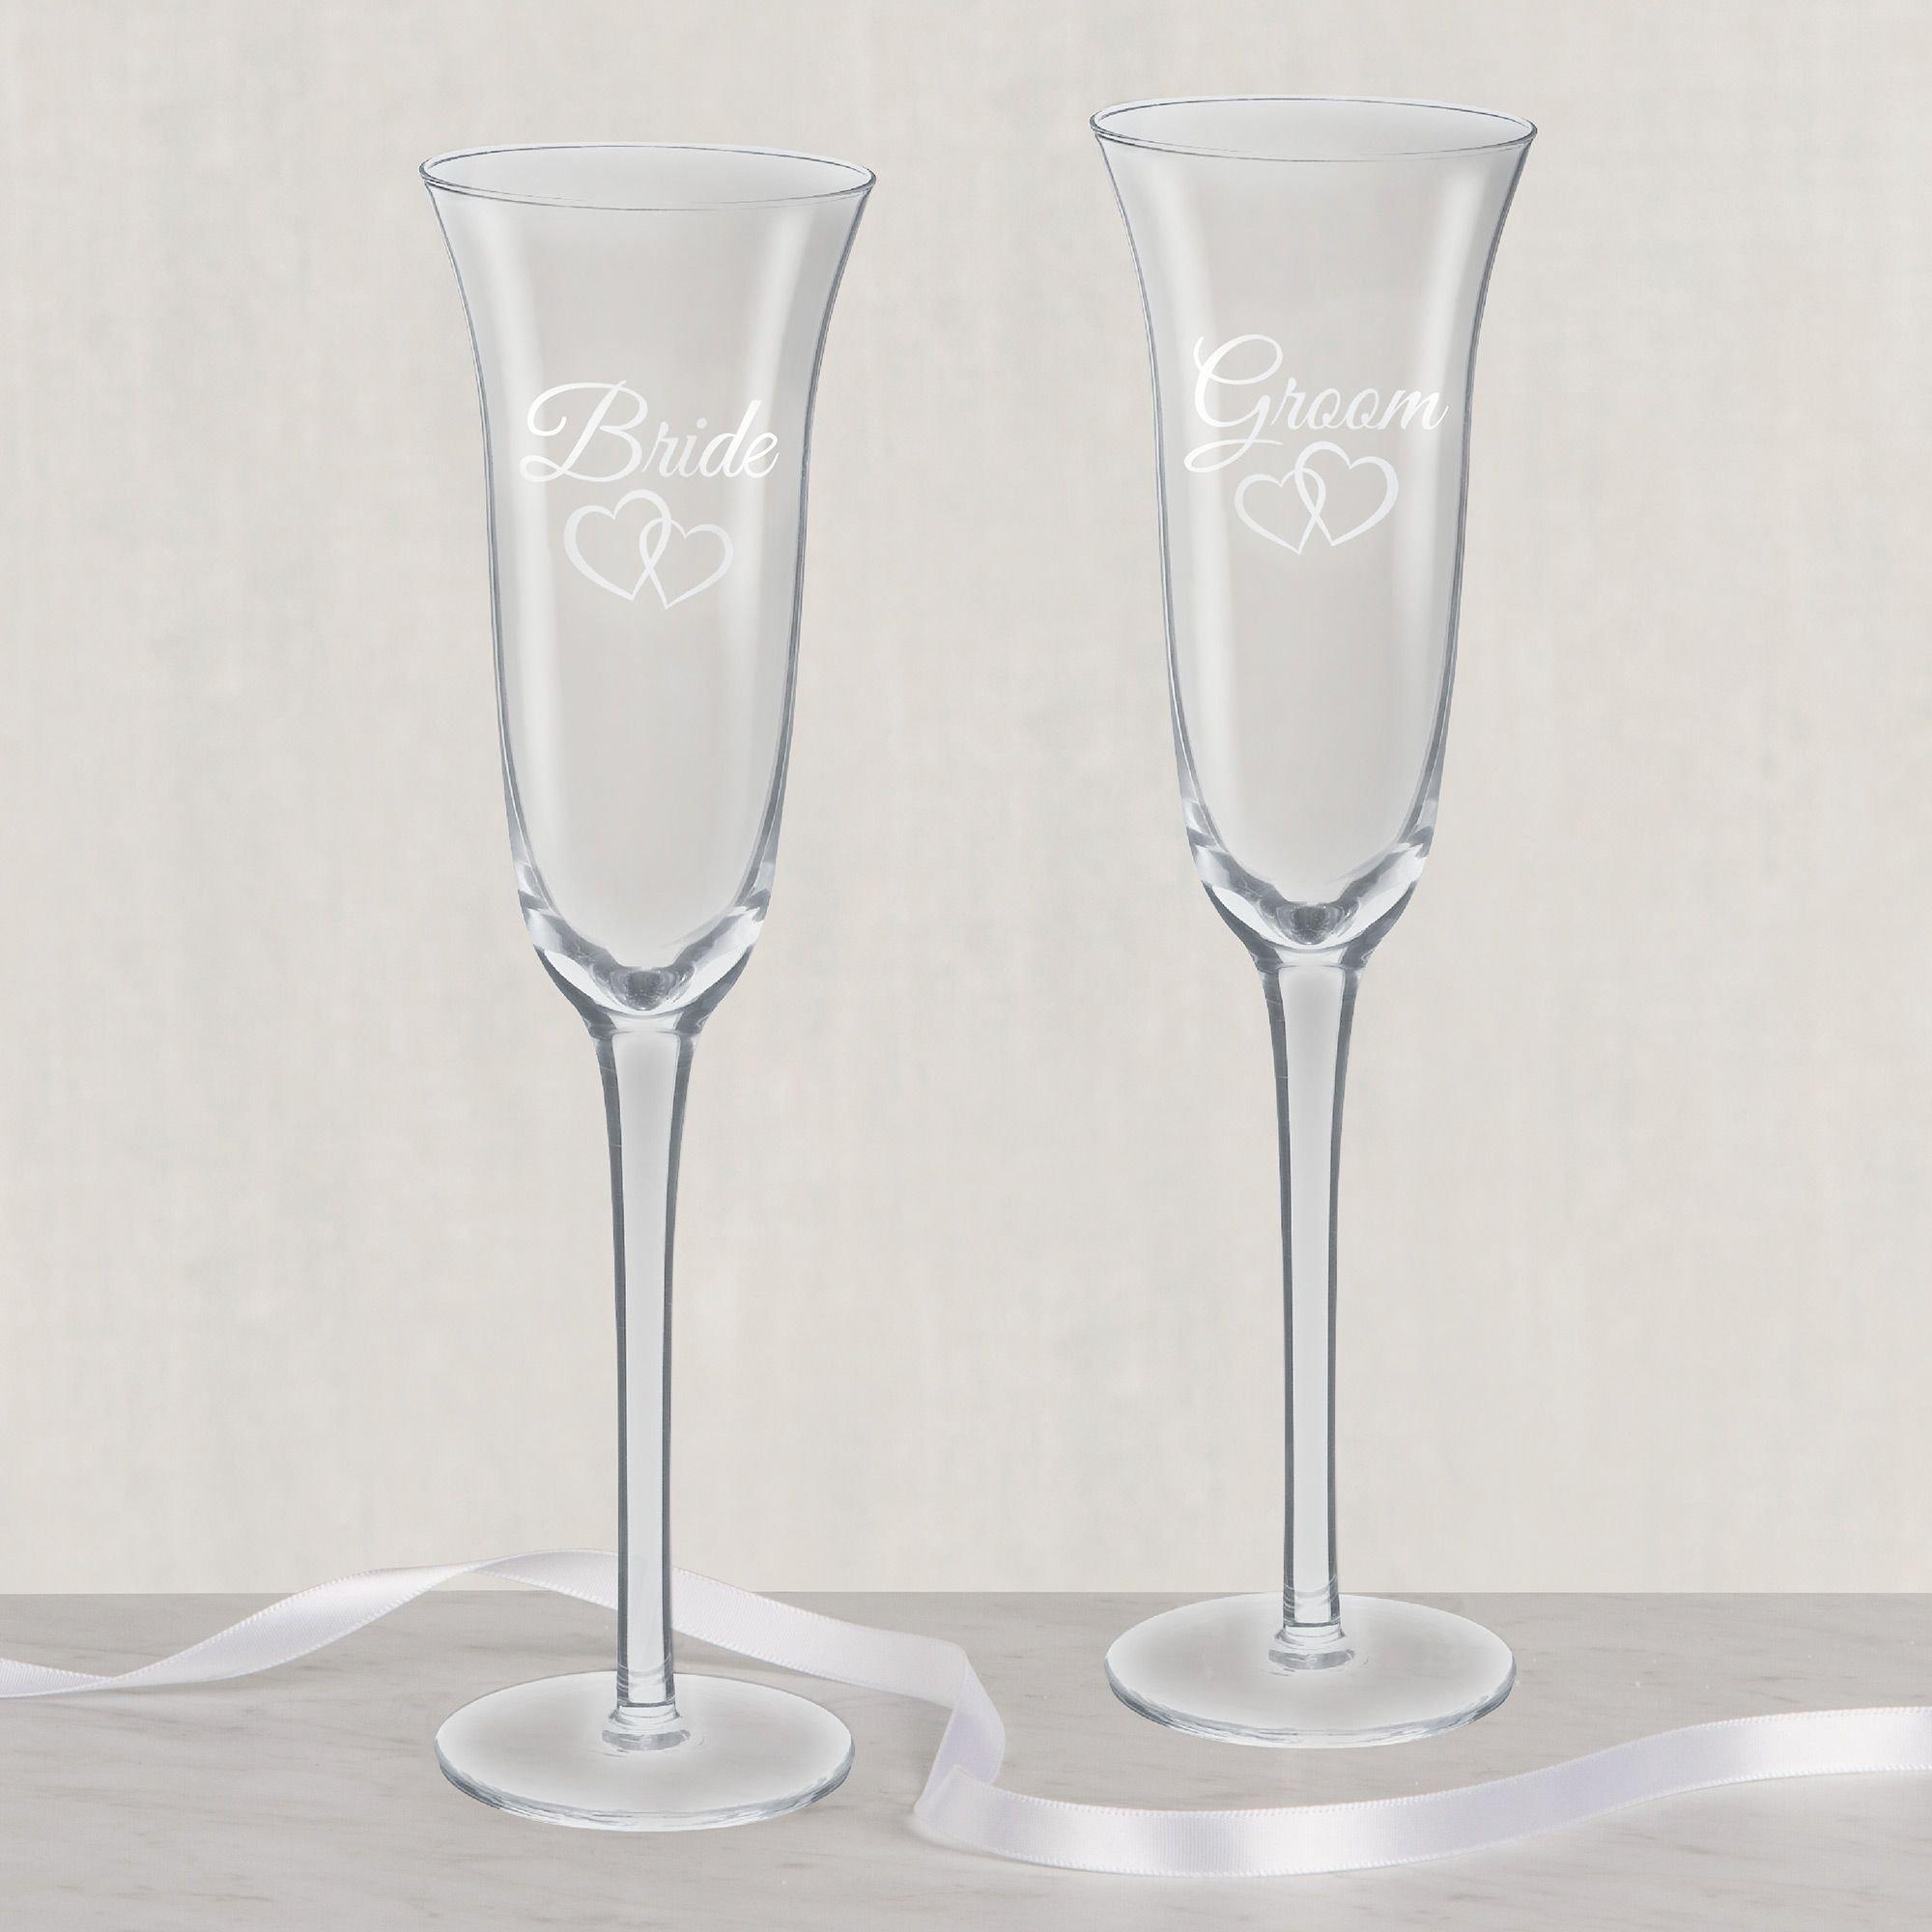 Glasseam Wedding Champagne Flutes Set of 2 Gold Toasting Glasses for Bride  and Groom